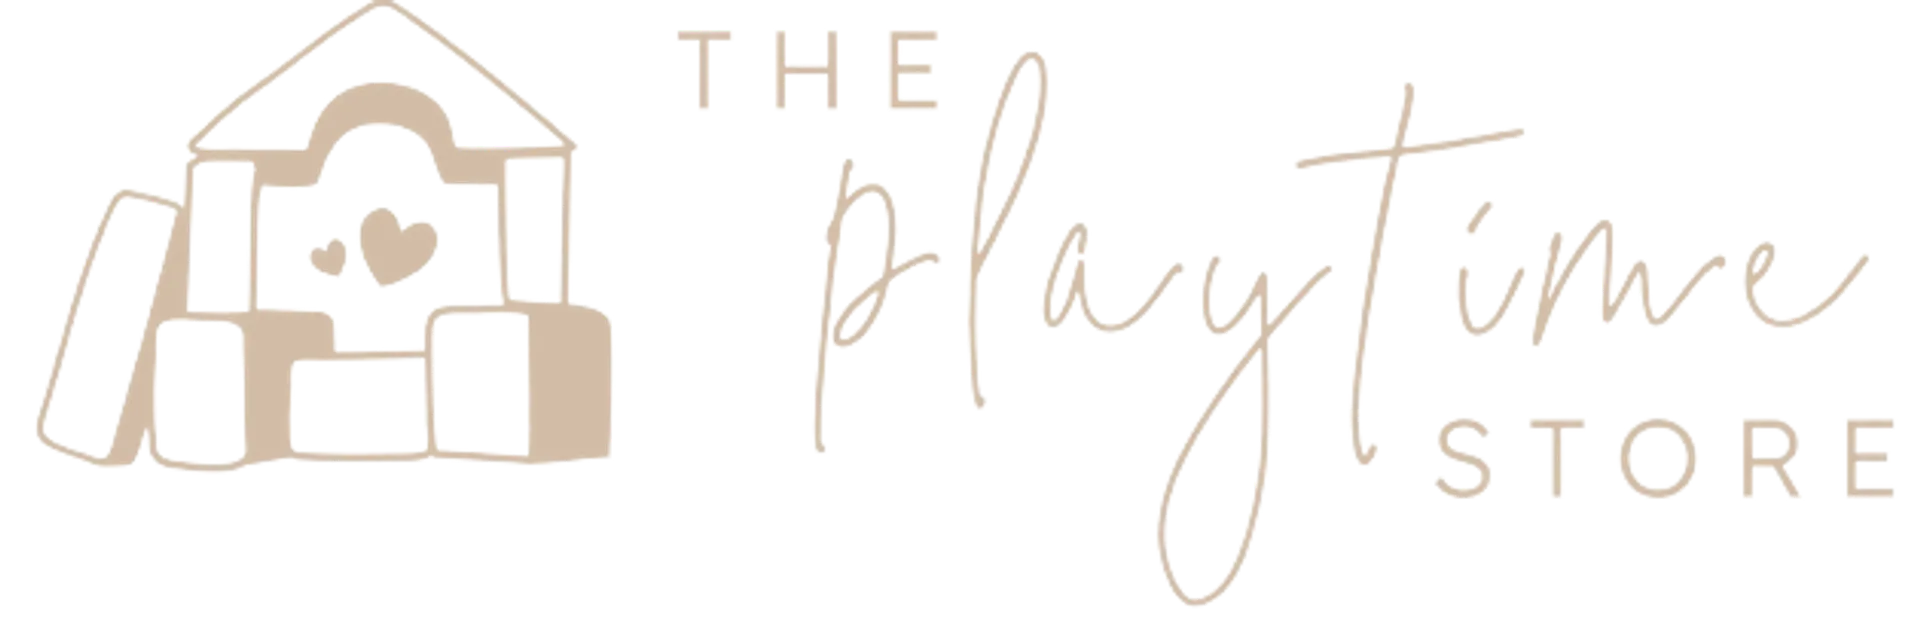 THE PLAYTIME STORE logo. Current weekly ad